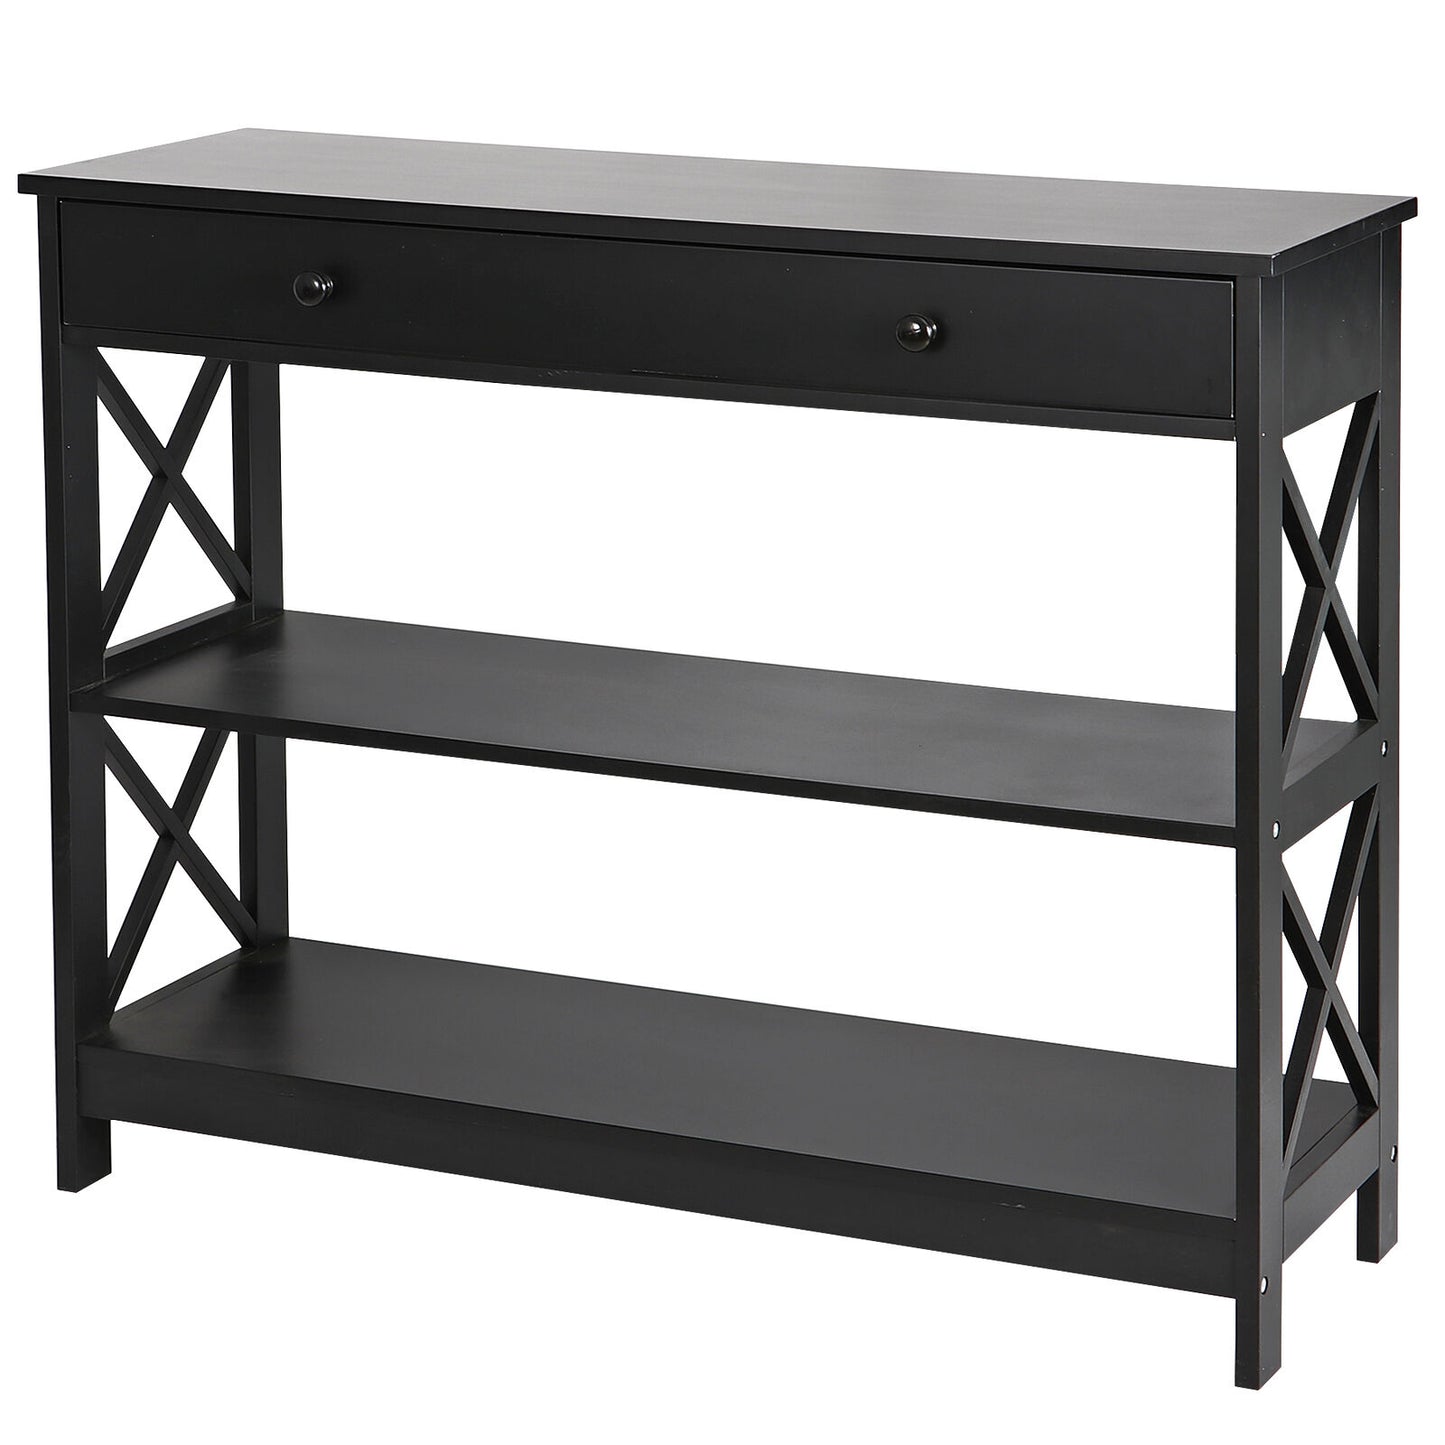 39.4"Console Sofa Entry Table 3-Tier Shelf with 2 Drawers 2 Open Storage X-frame